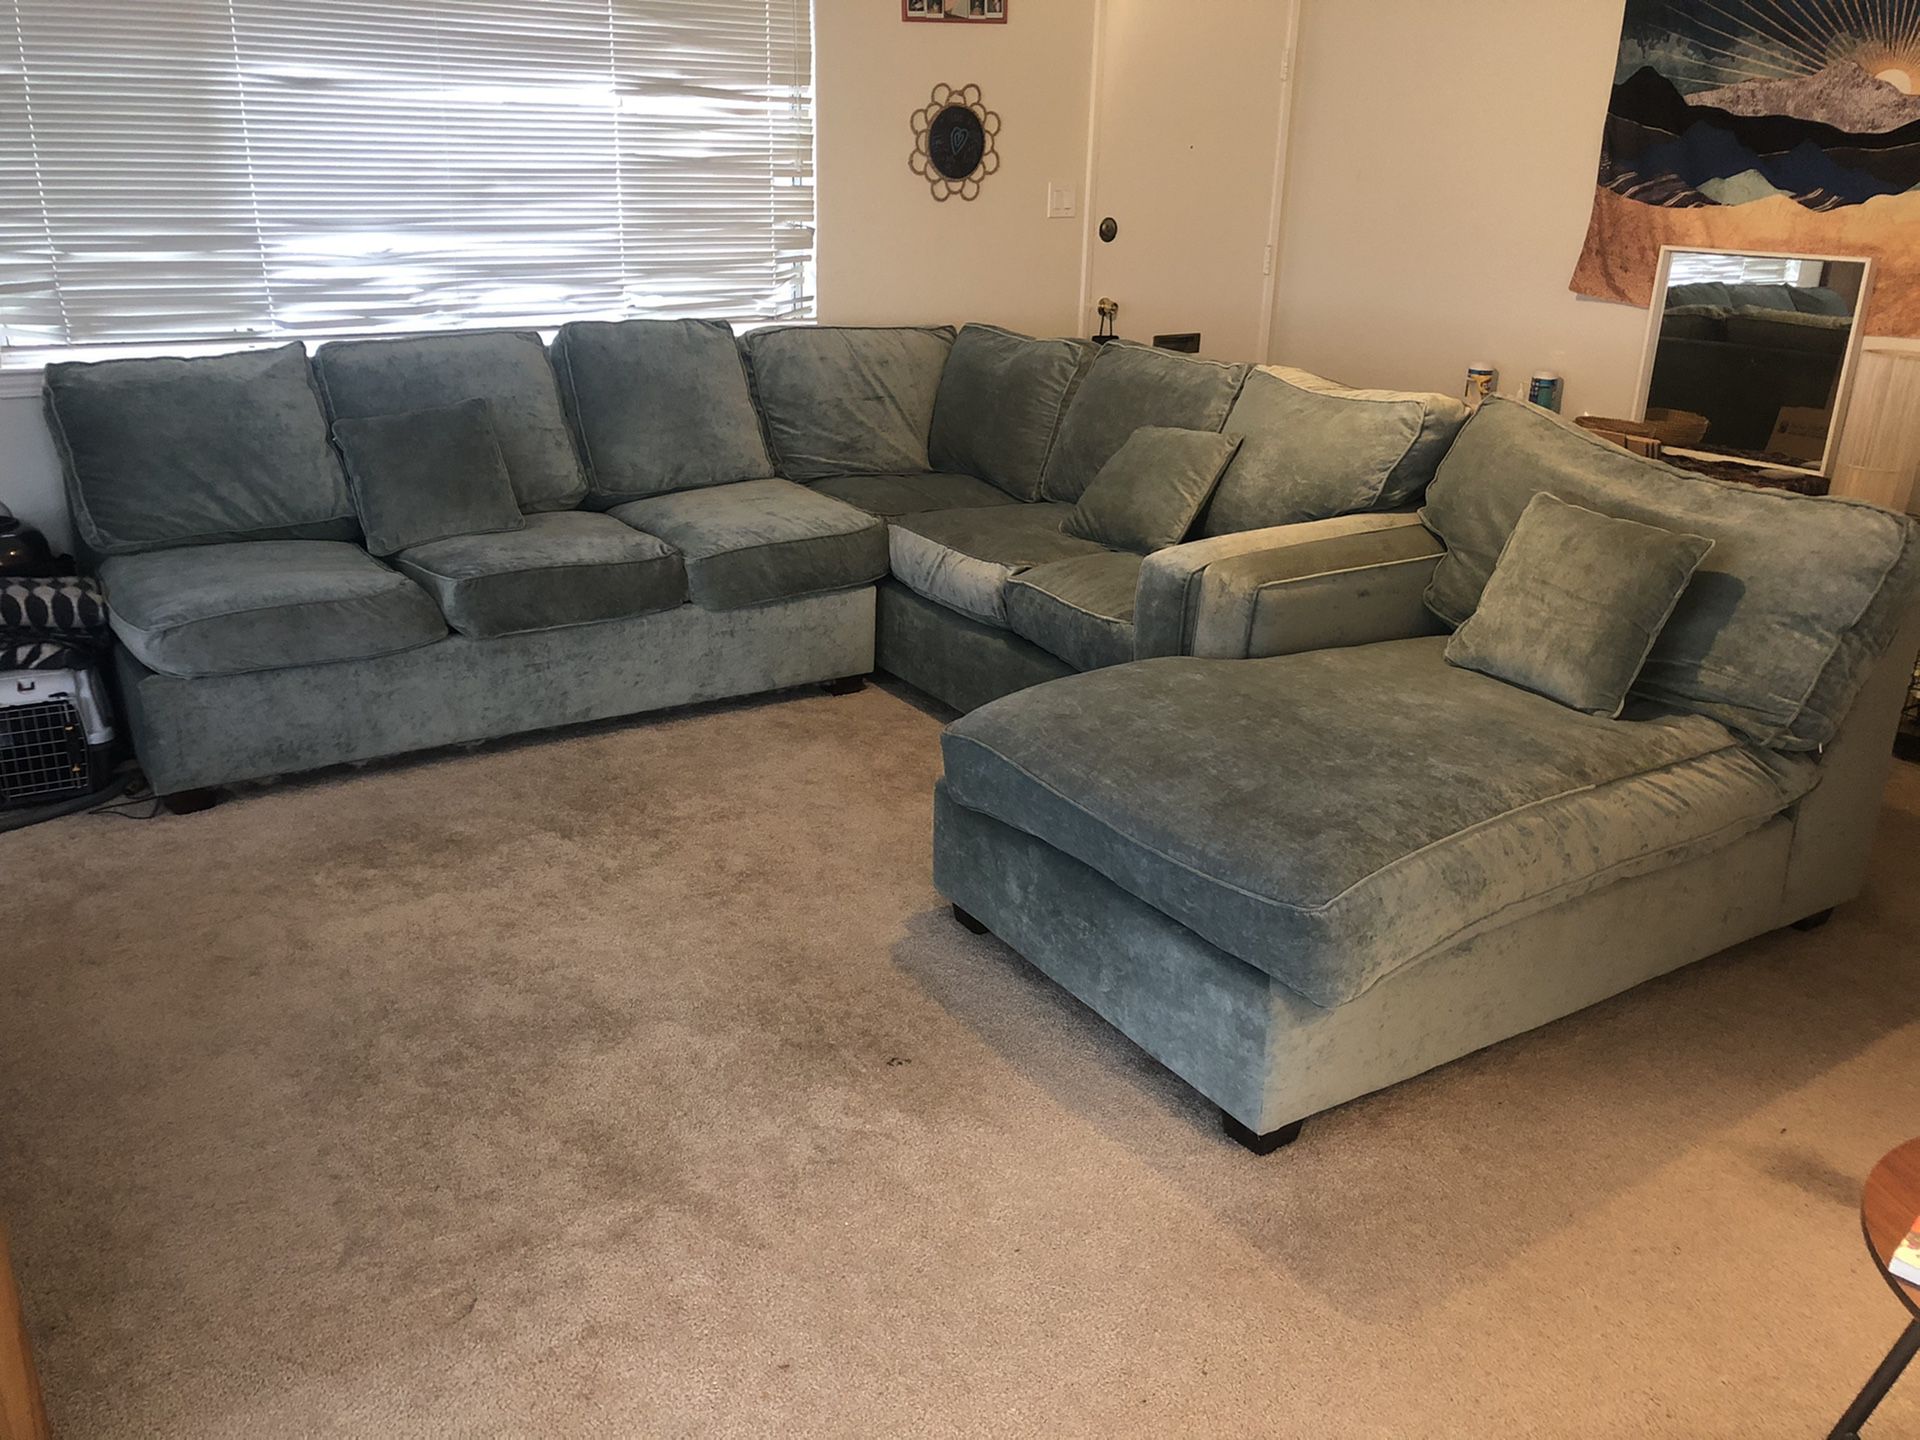 Large velvet sectional couch